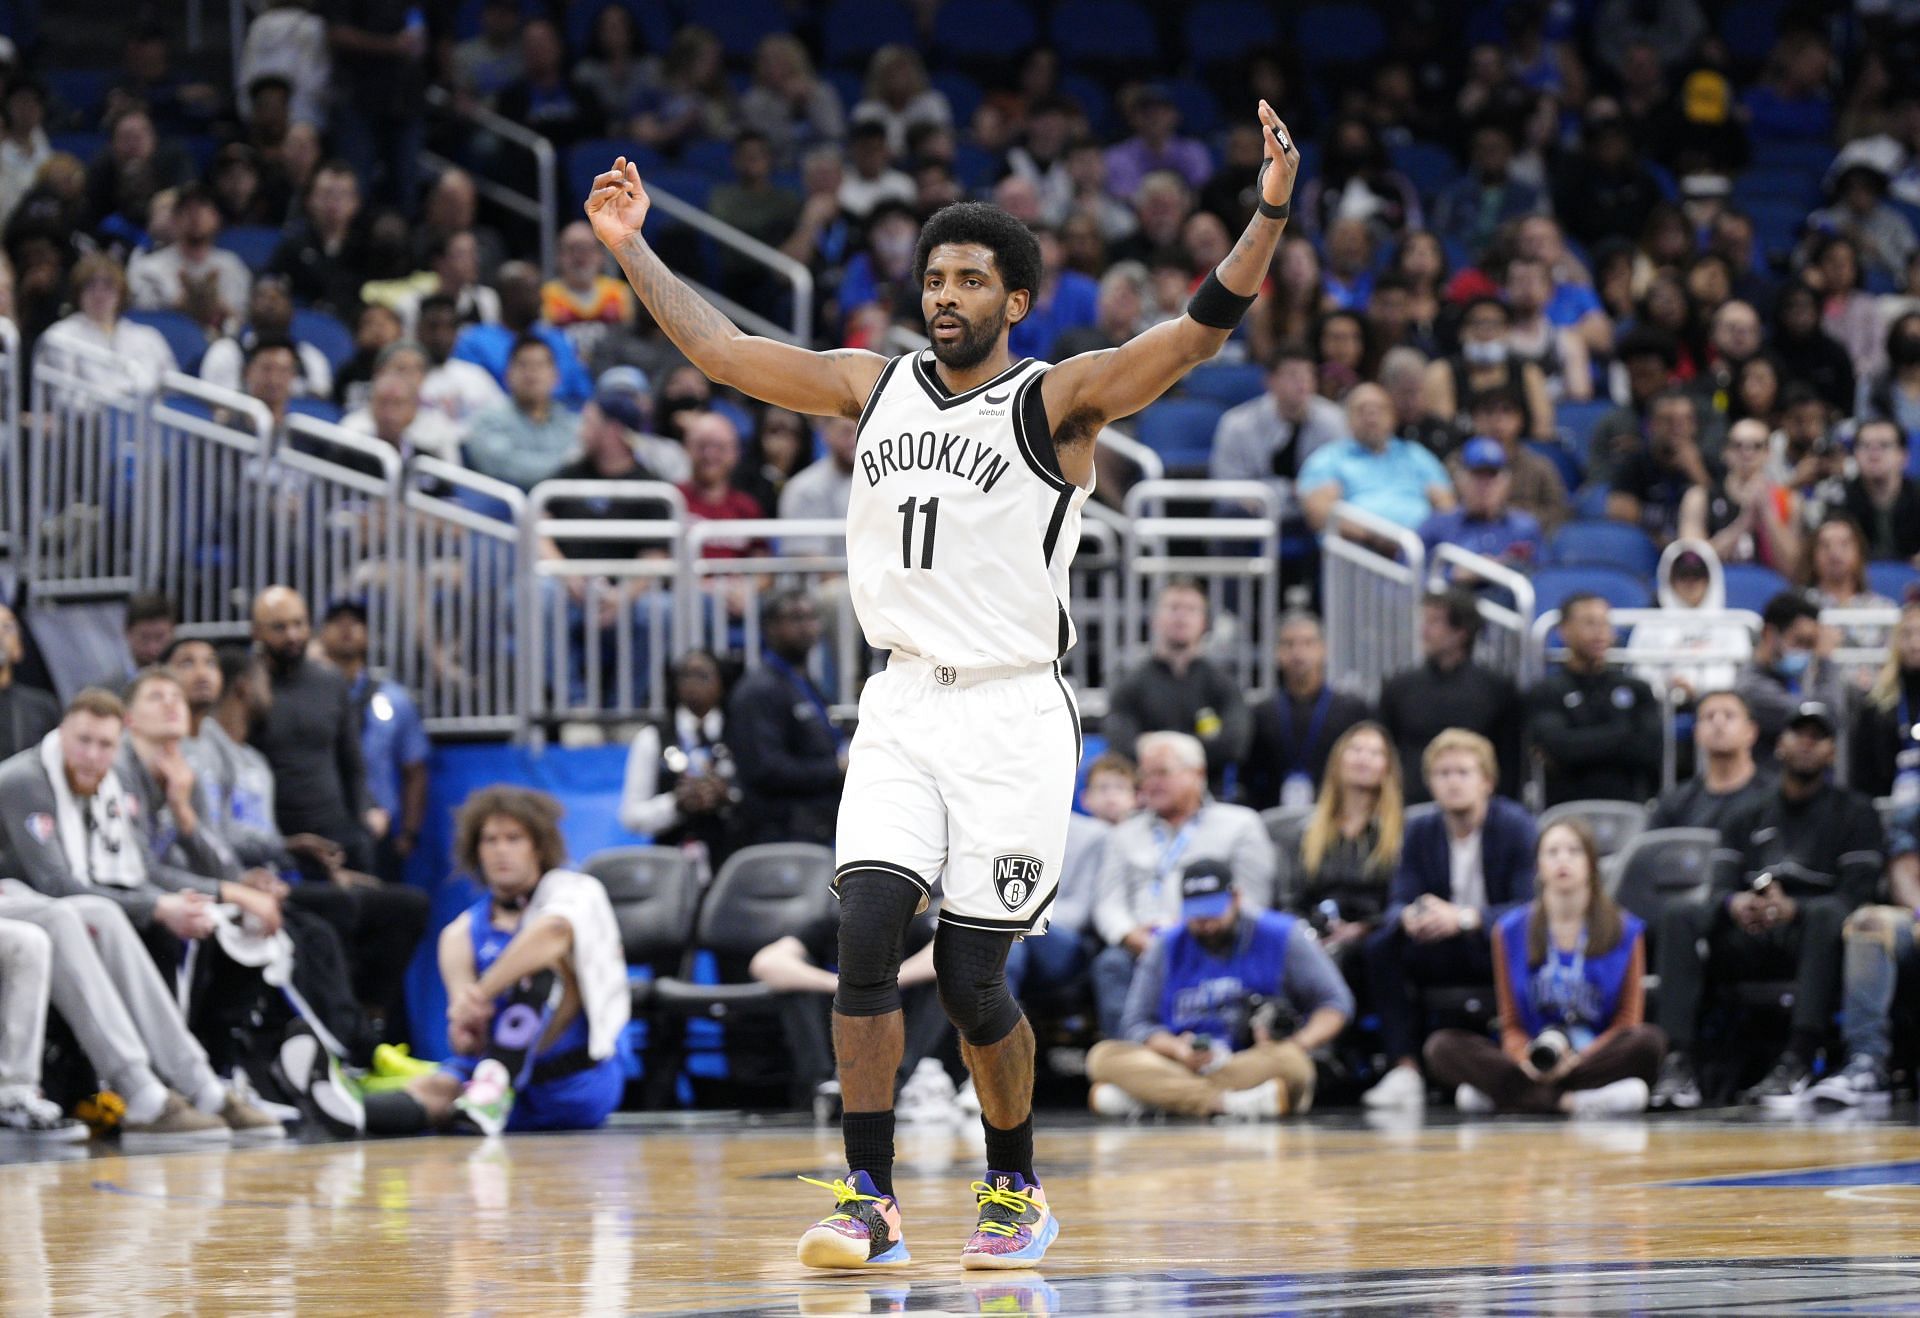 Kyrie Irving of the Brooklyn Nets celebrates after scoring against the Orlando Magic on March 15 in Orlando, Florida.